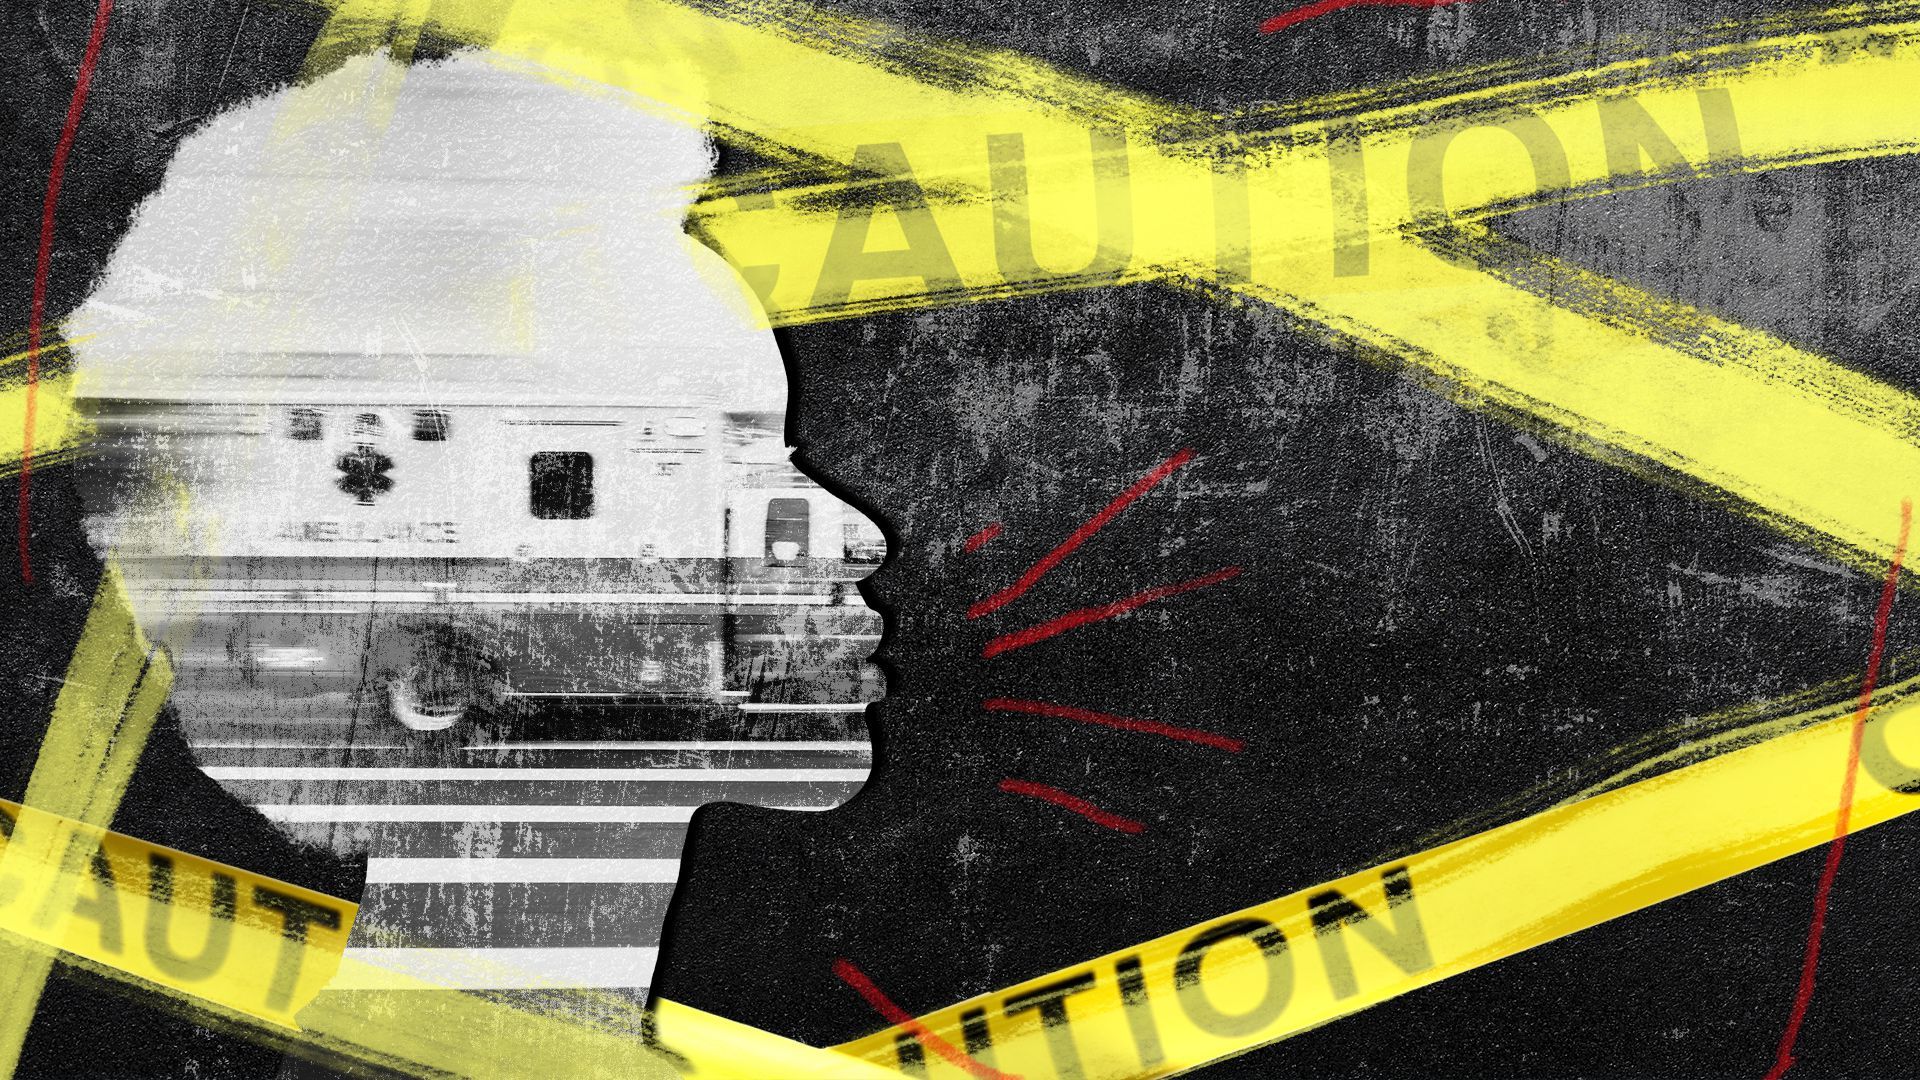 Illustrated collage of a person’s silhouette with an ambulance and caution tape.